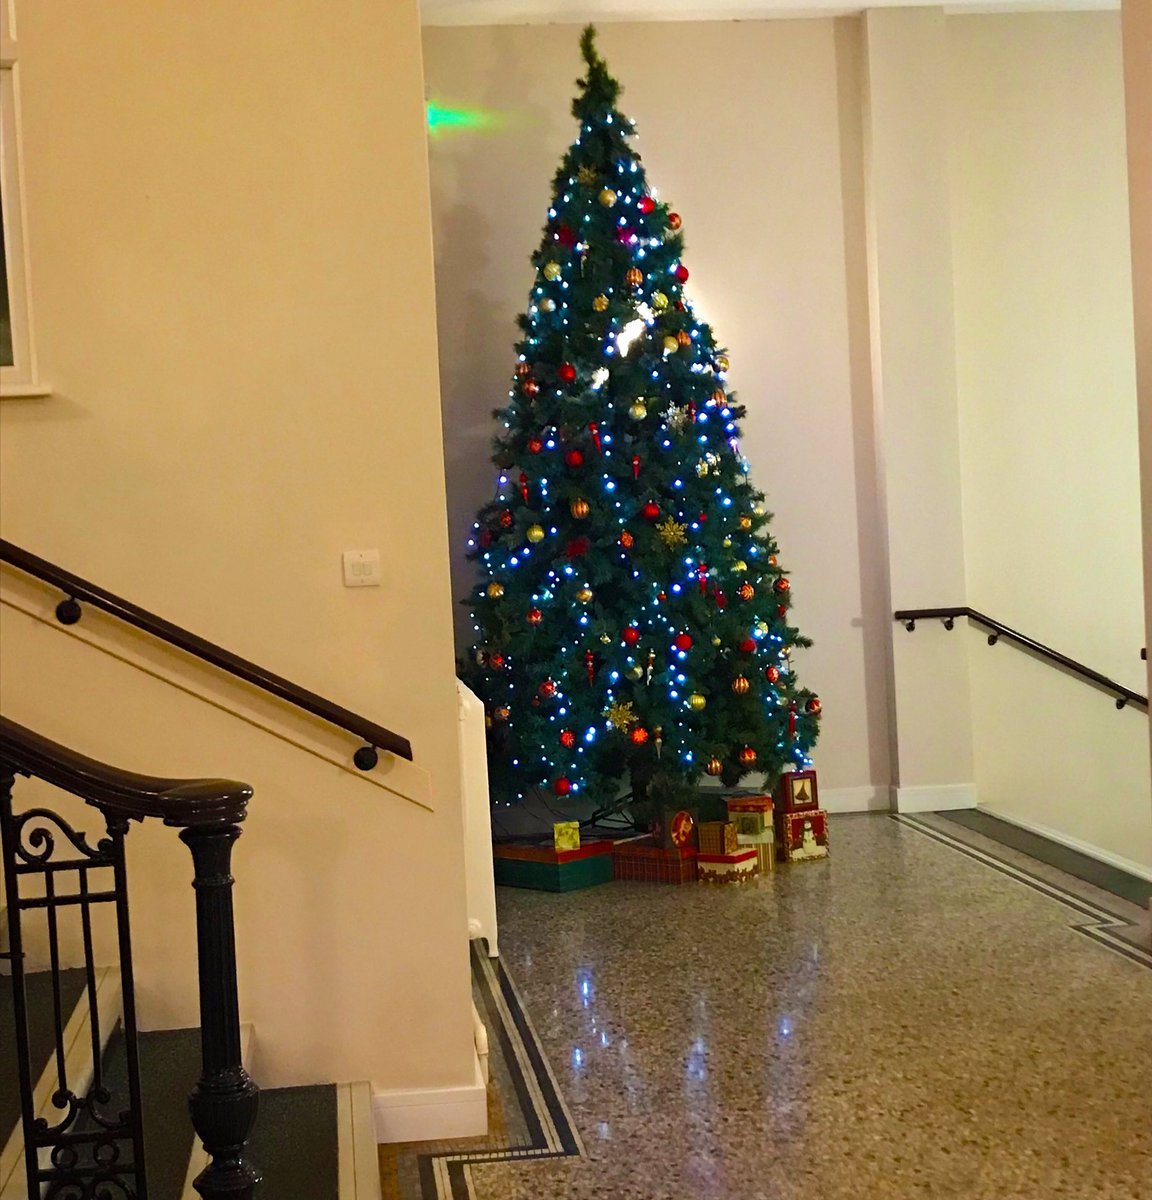 Christmas is coming here at the Westmeria offices #Christmas #holidays